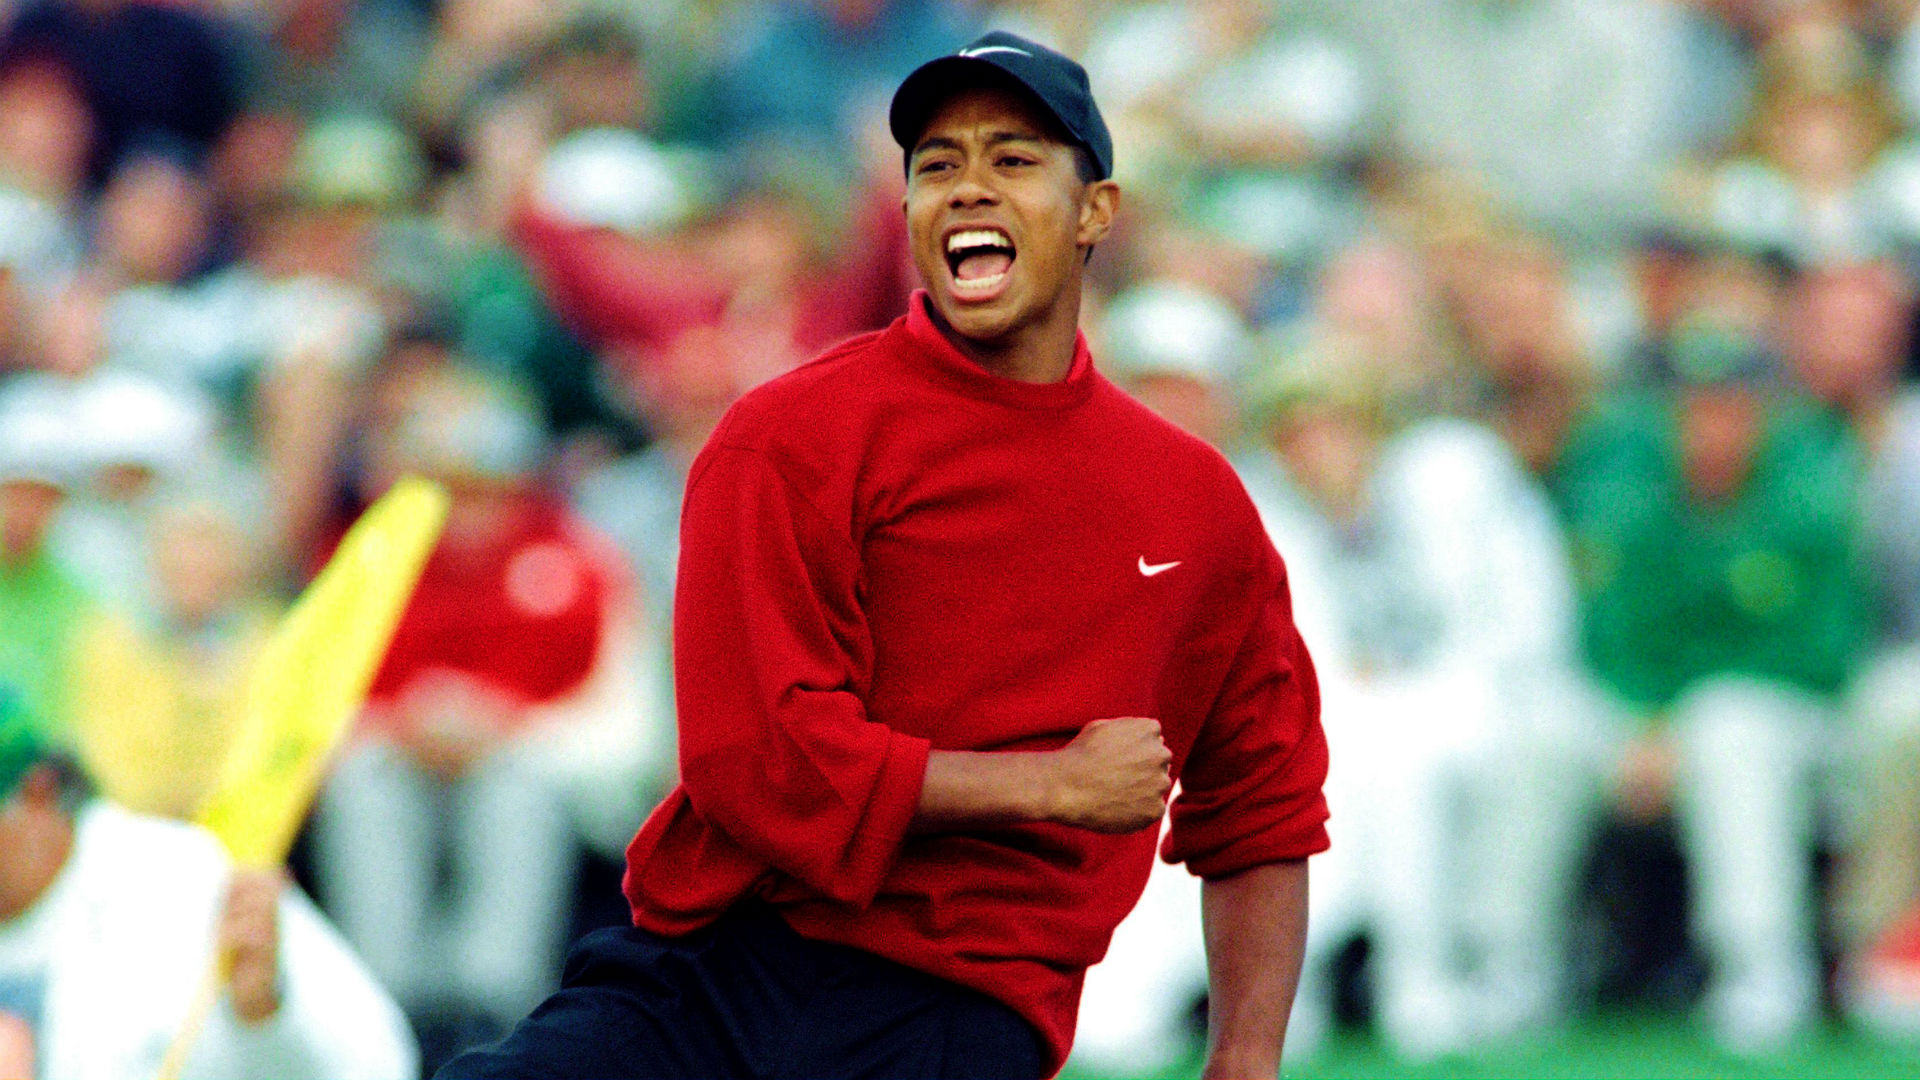 Tiger Woods' history and wins at The Masters | Golf | Sporting News